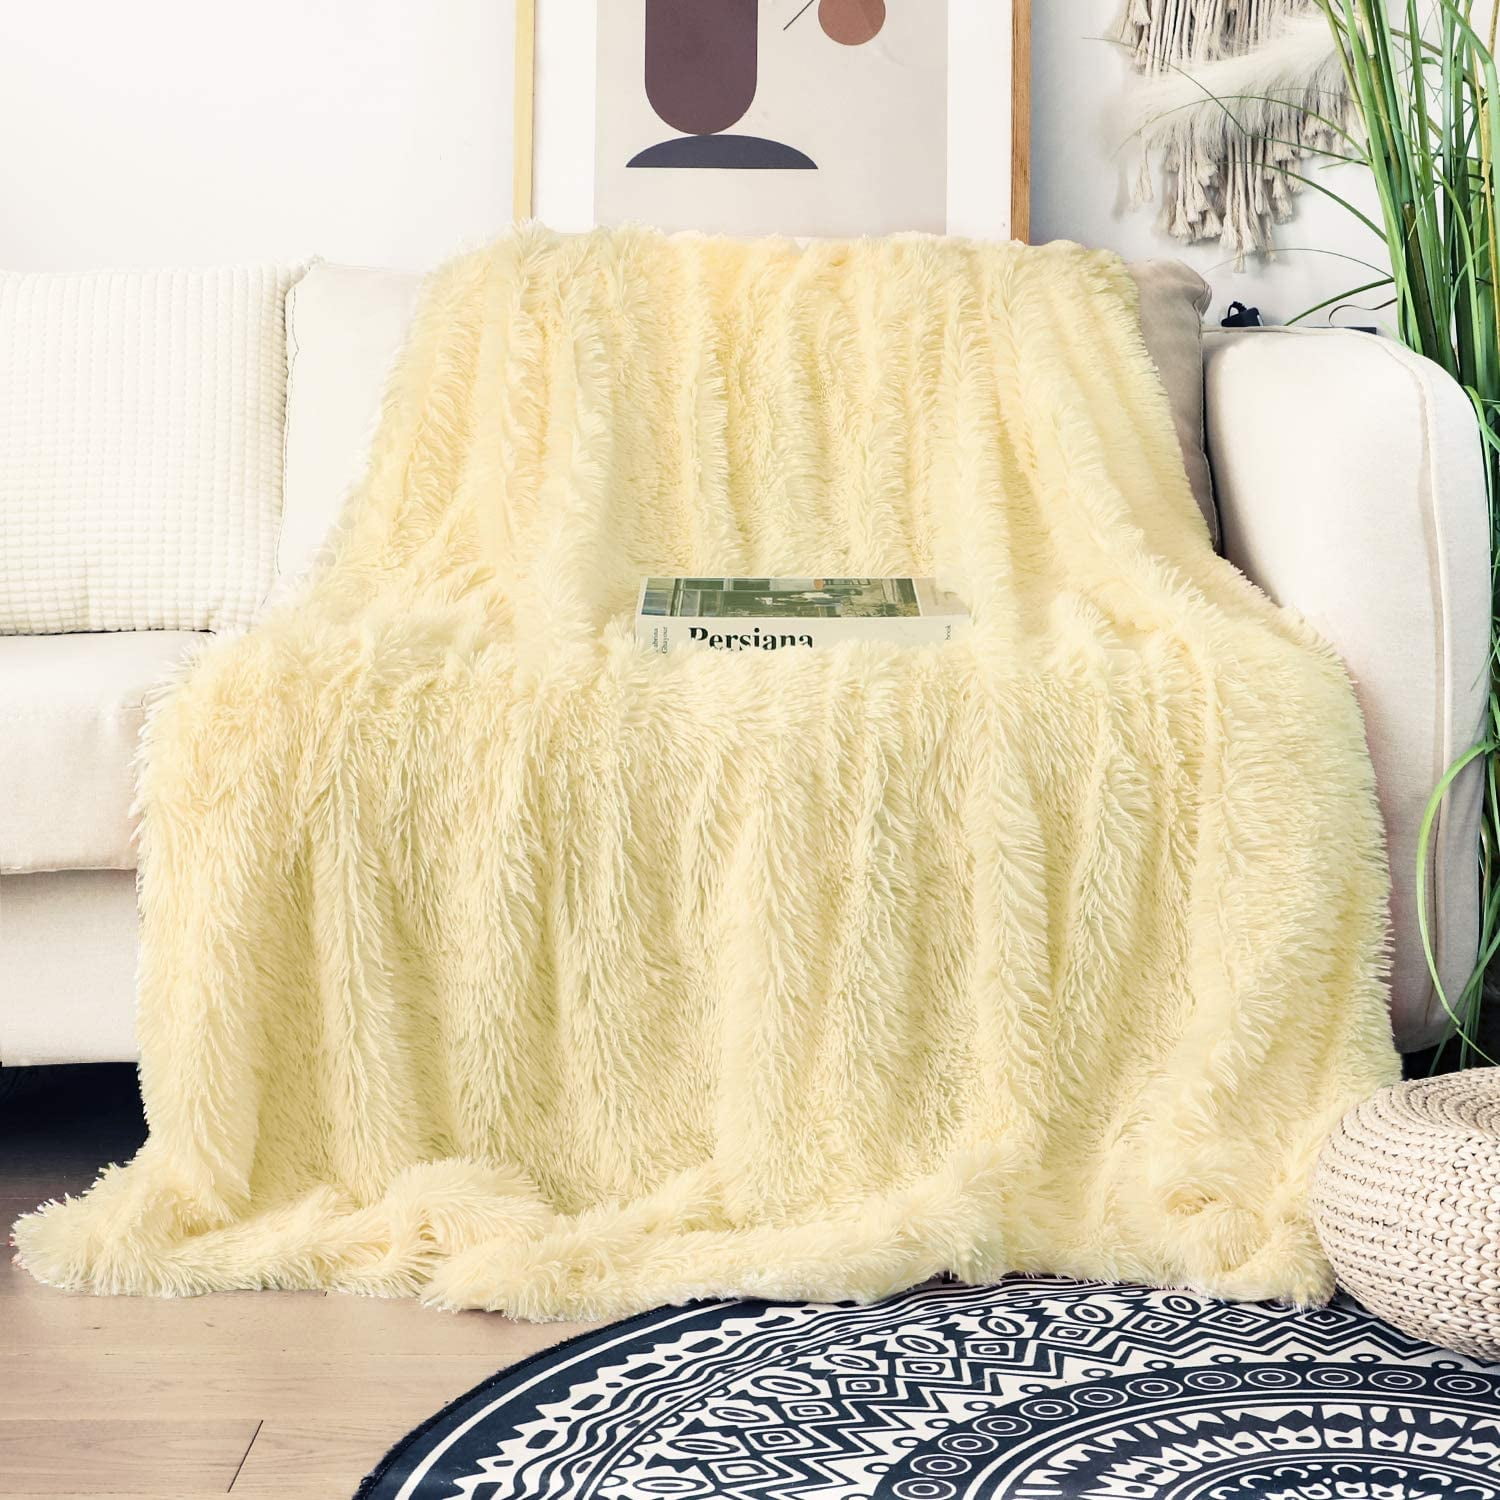 Cream Sherpa Fleece Throw Blanket and Throws,Super Soft Blanket Fuzzy Plush Bedding Blanket Bed Throws.Premium Cozy Blankets for Bed Couch Sofa Lightweight Bed Blanket Best Comfy Blankets 51x63